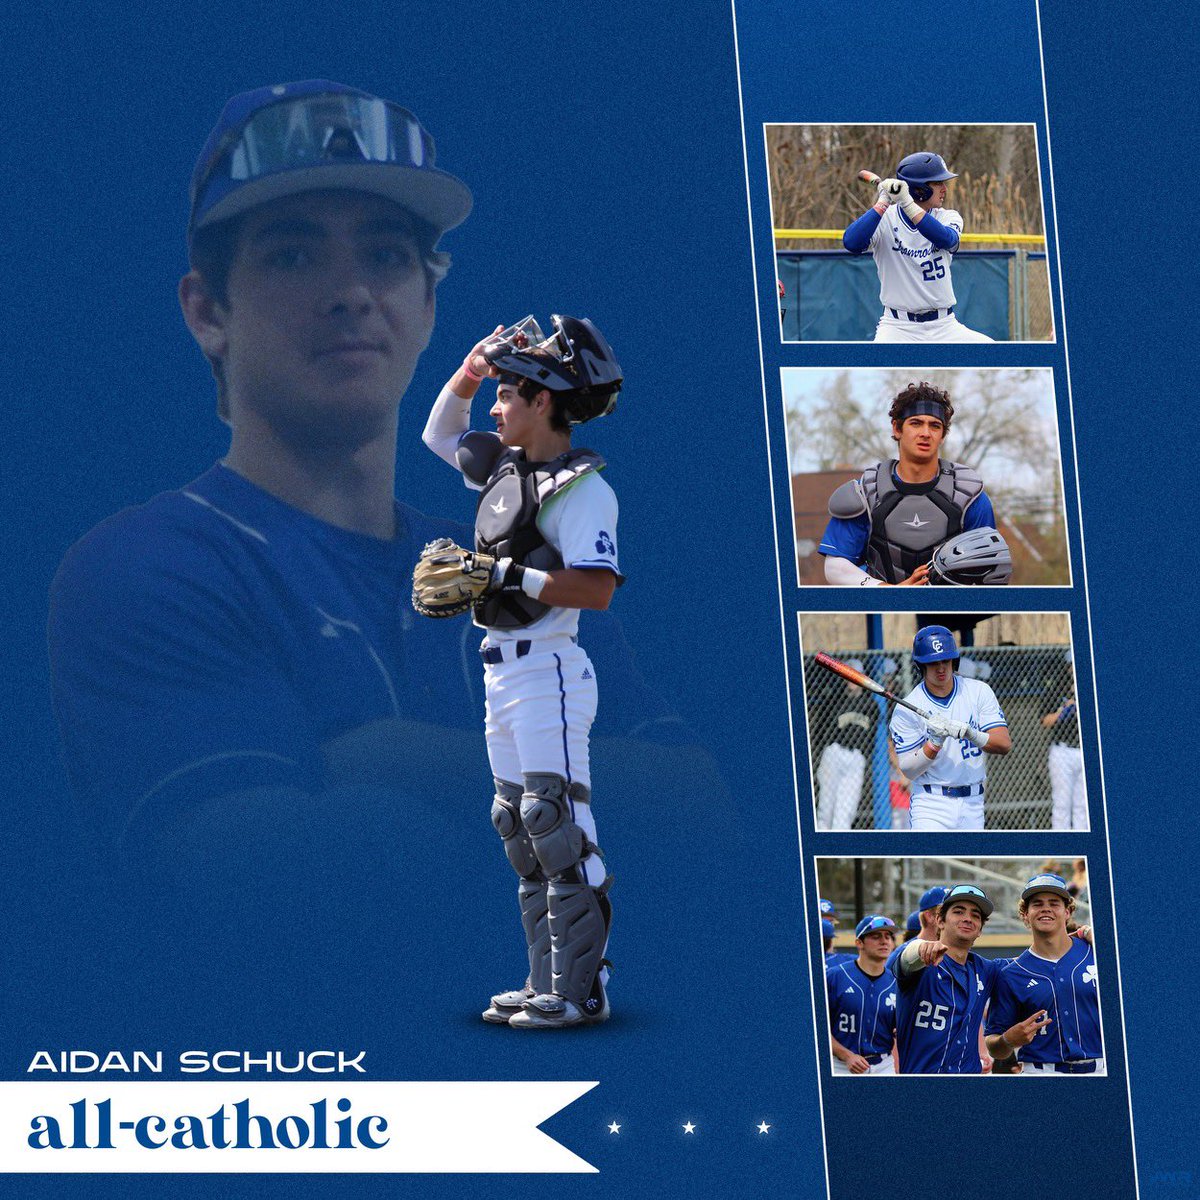 Congrats to @OUGrizzBaseball commit @AidanSchuck on earning All-Catholic! In league play Schuck led the team with a phenomenal .414 avg. Aidan also tallied 7 2Bs, 1 3B, 1 HR, 13 RBI and an astounding .1135 OPS. In 70 plate appearances, Schuck K’d only 6 times! Well done Aidan!